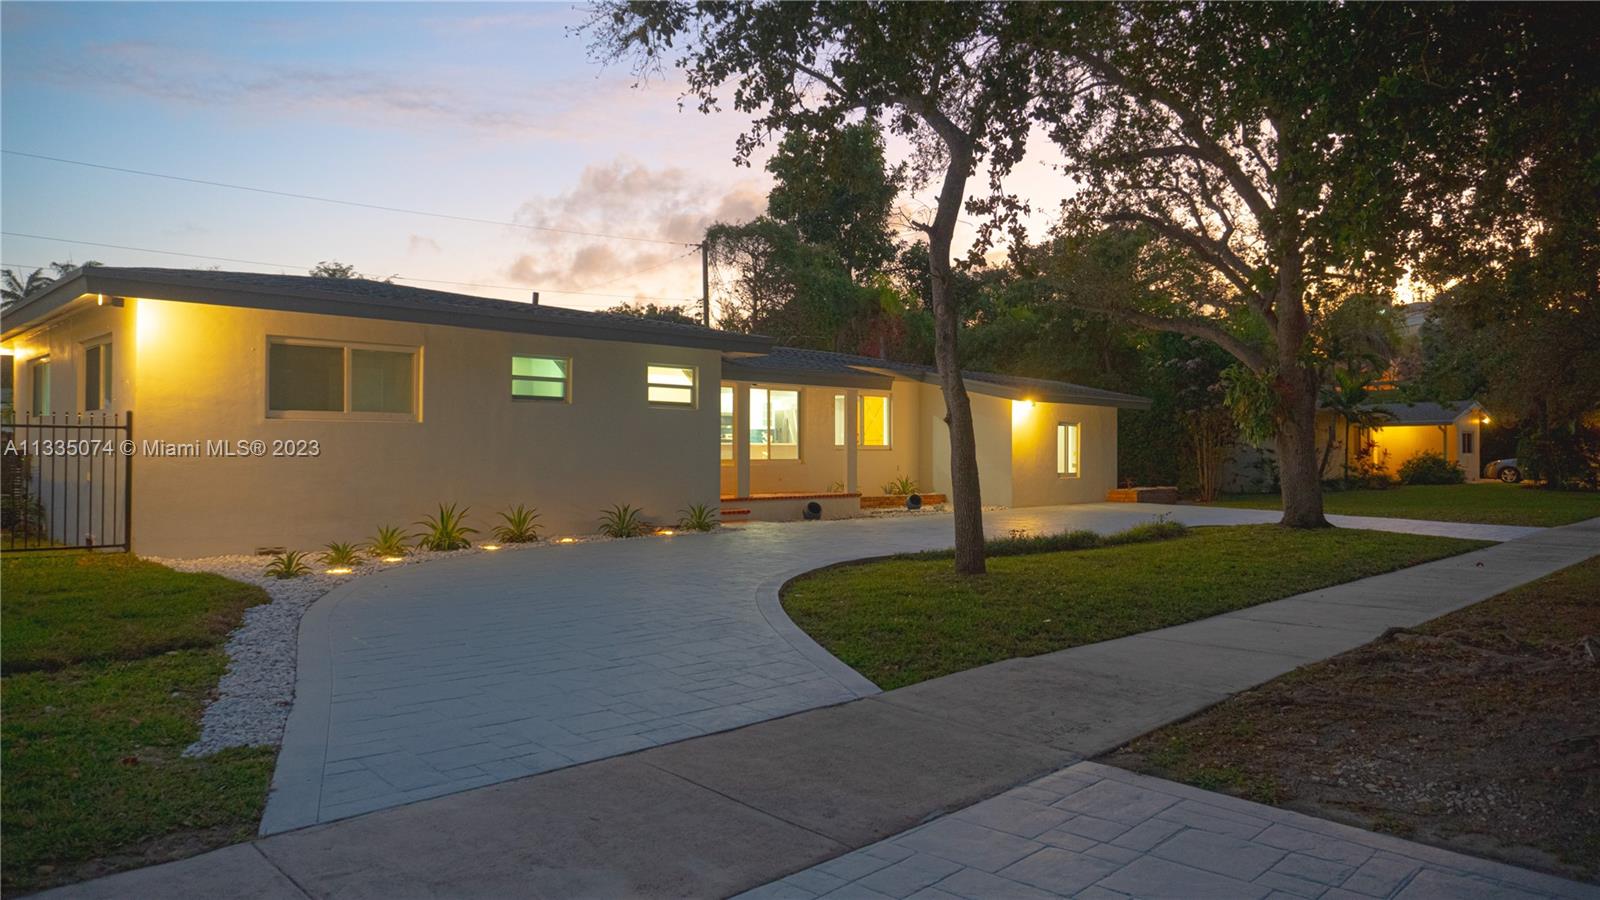 Step into luxury in this fully remodeled 3/2 North Pinecrest pool home. Located on a quiet dead-end street, this gem boasts new appliances, impact windows, and a custom-built pool. The open-concept kitchen and updated bathrooms add a modern touch, while hardwood floors bring warmth. An added bonus room offers versatility as a man's cave, playroom, or extra family room. Lawn and pool maintenance are included in rent. Don't miss this rare find!